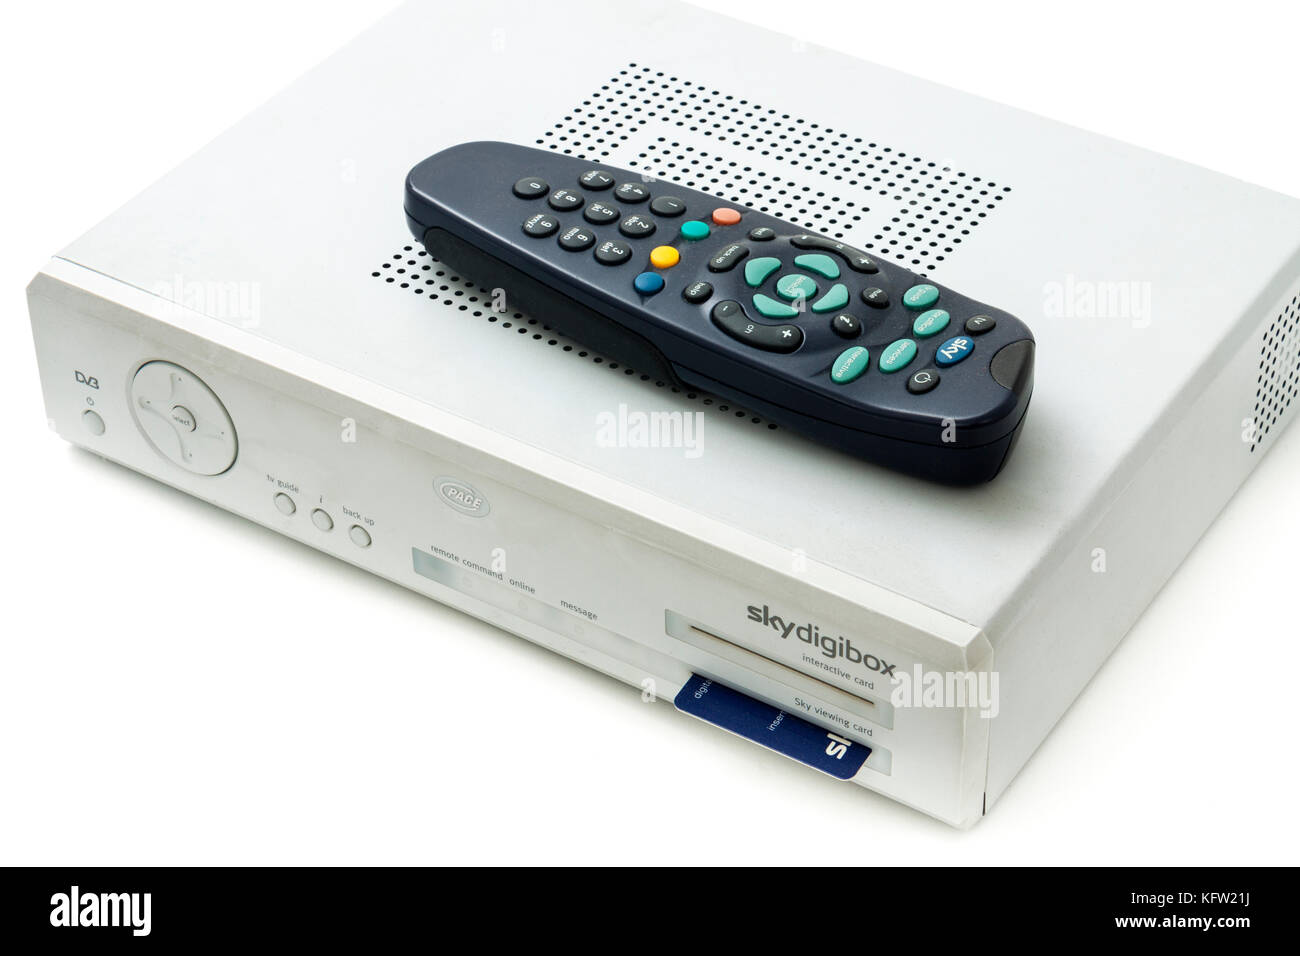 Sky digibox (Pace DS430N) satellite television receiver with remote control from 1994, designed to receive the British Sky Broadcasting service. Stock Photo